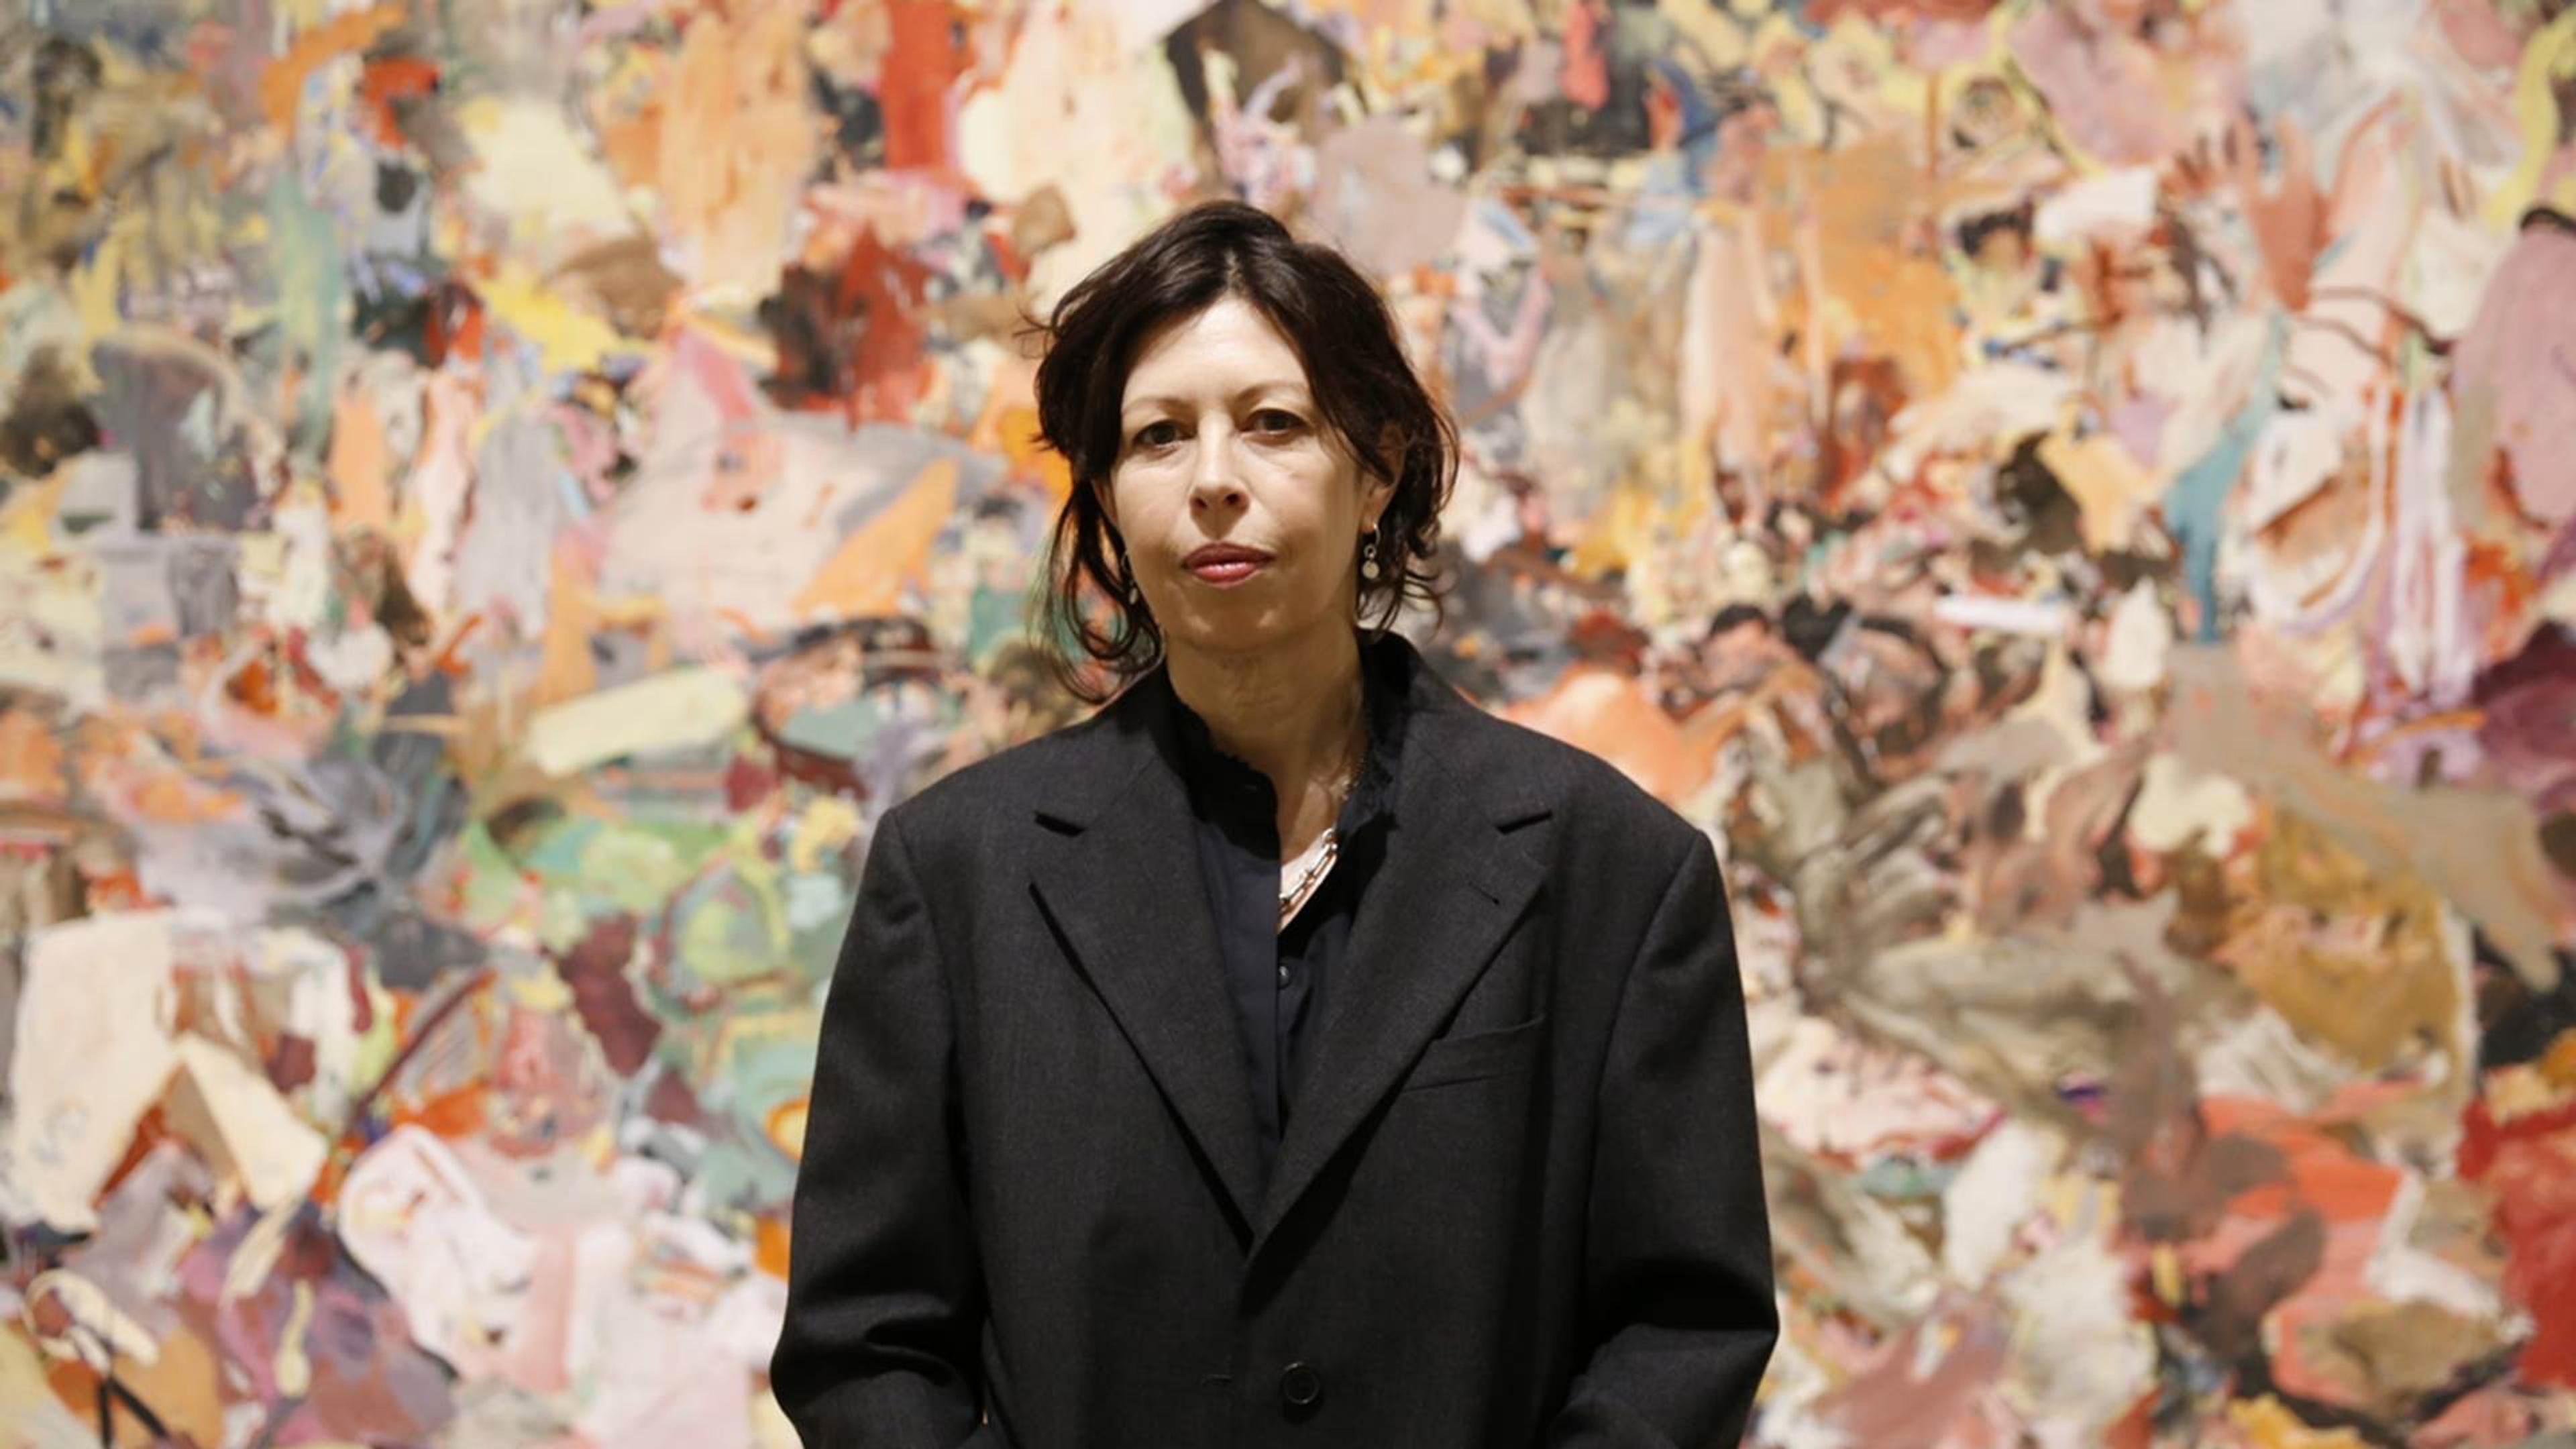 Portrait of artist Cecily Brown in front of her vibrant painting "Carnival and Lent" (2006-2008)